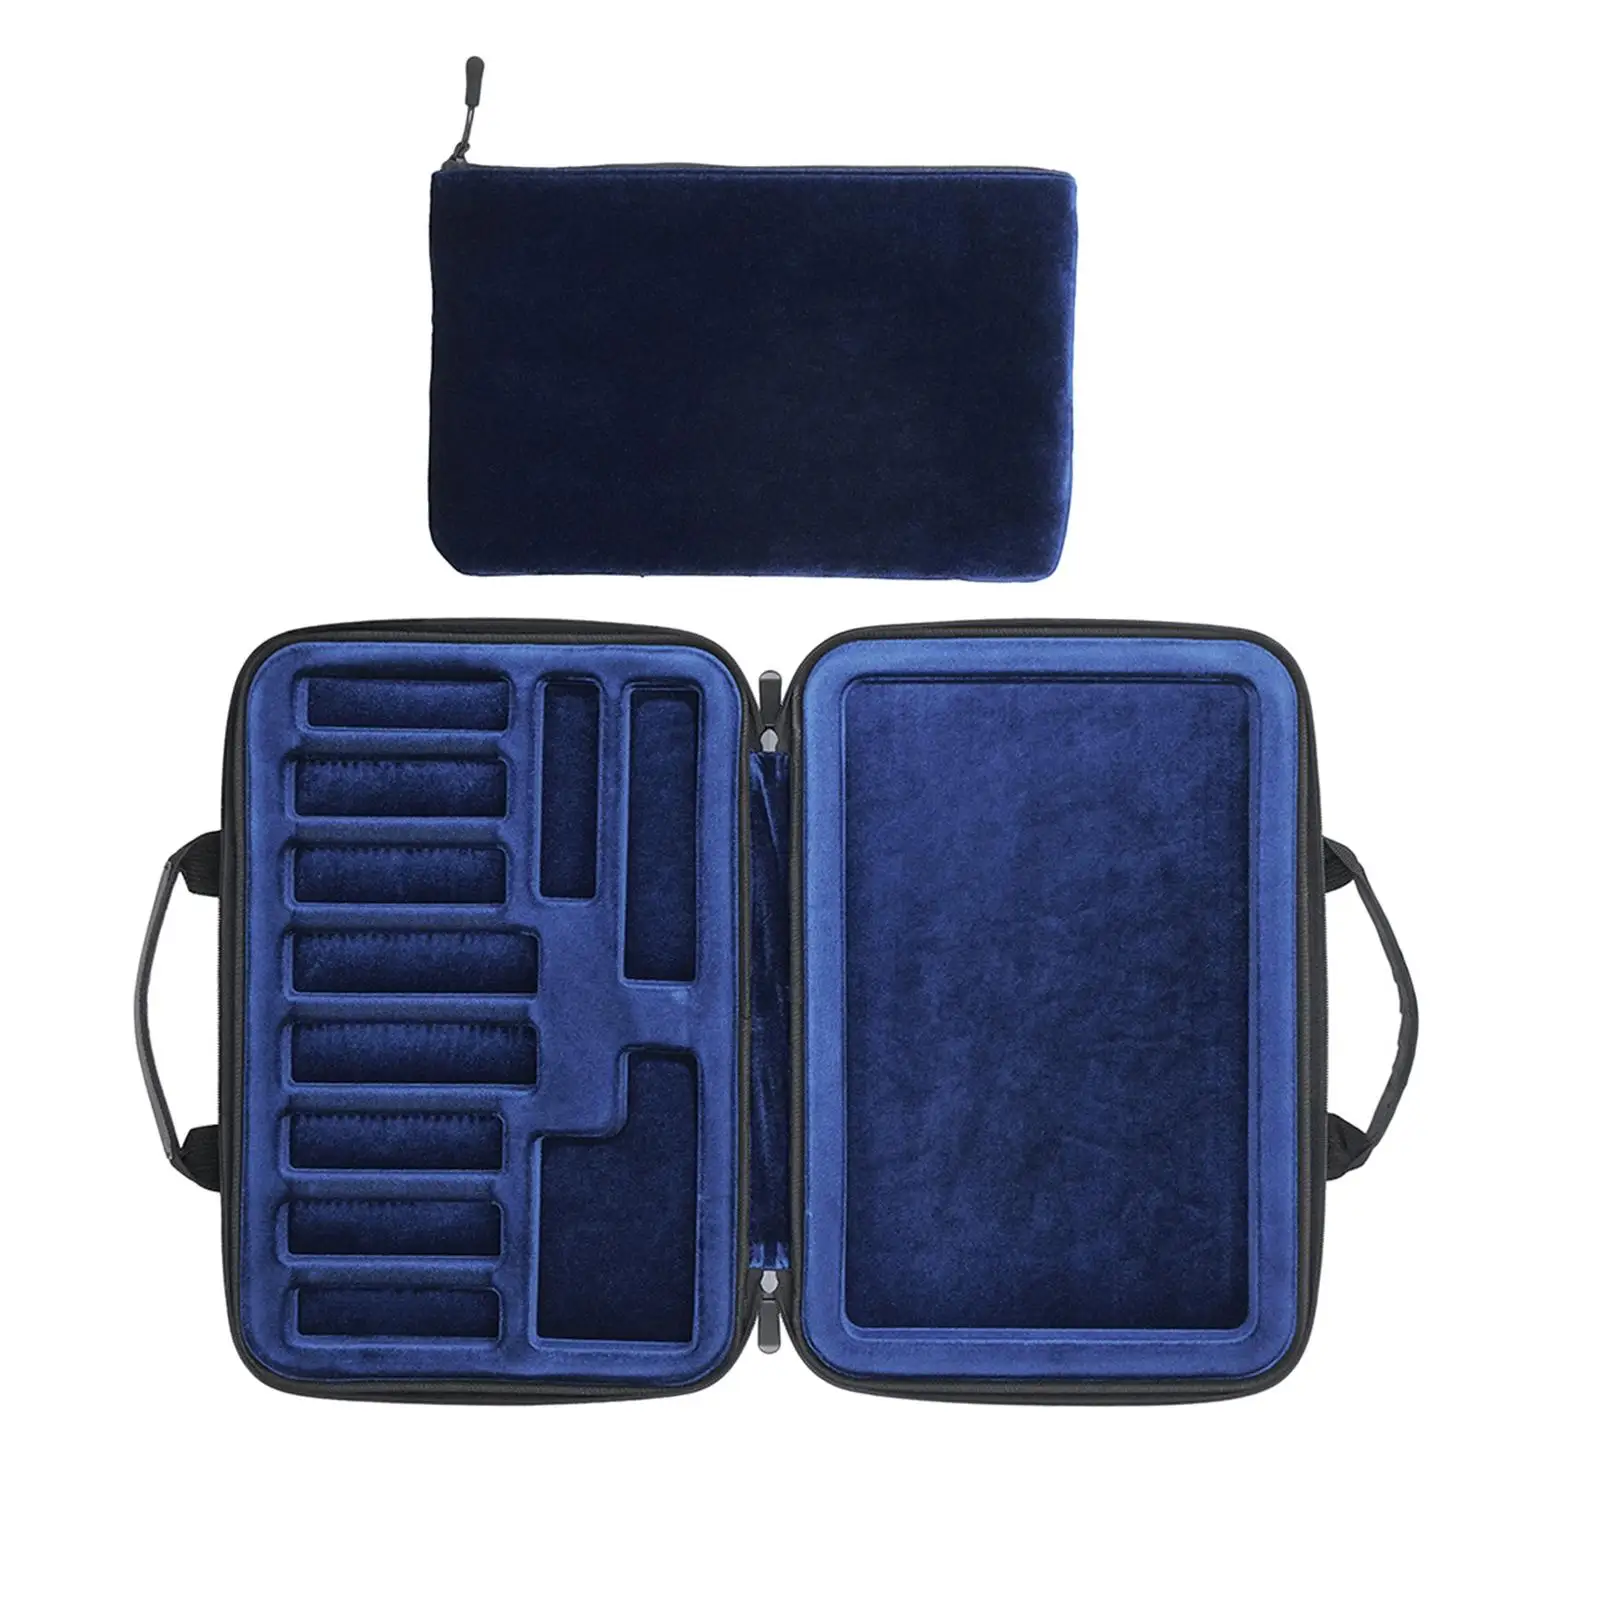 Carrying Bag Portable Weather Resistant Oxford Cloth Clarinet Saxophone Case